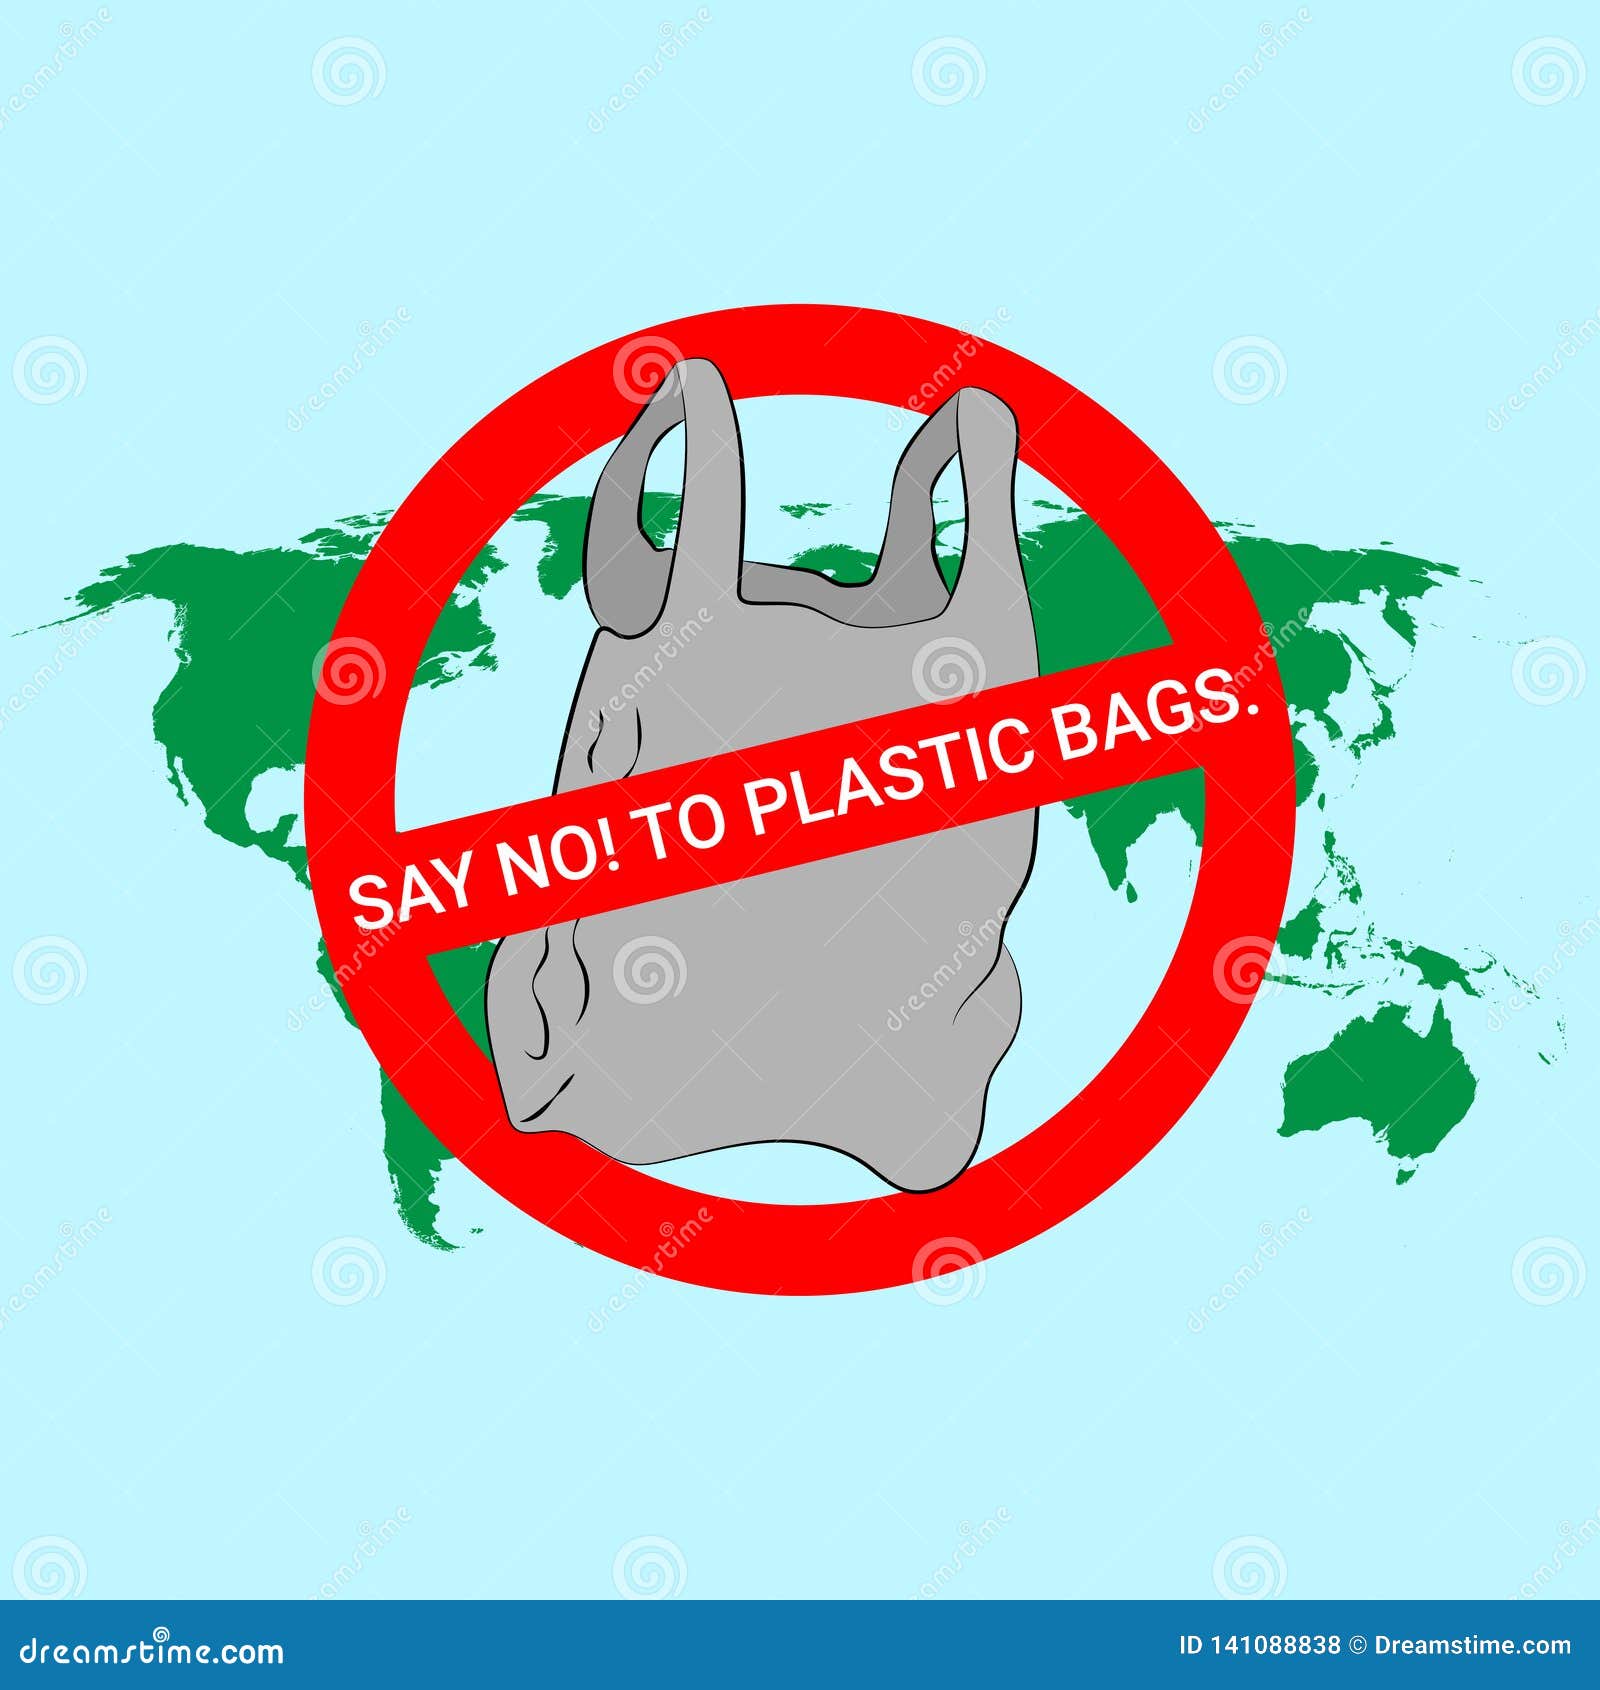 Say No To Plastic Bags Poster Stock Vector Illustration Of Reduce Package 141088838